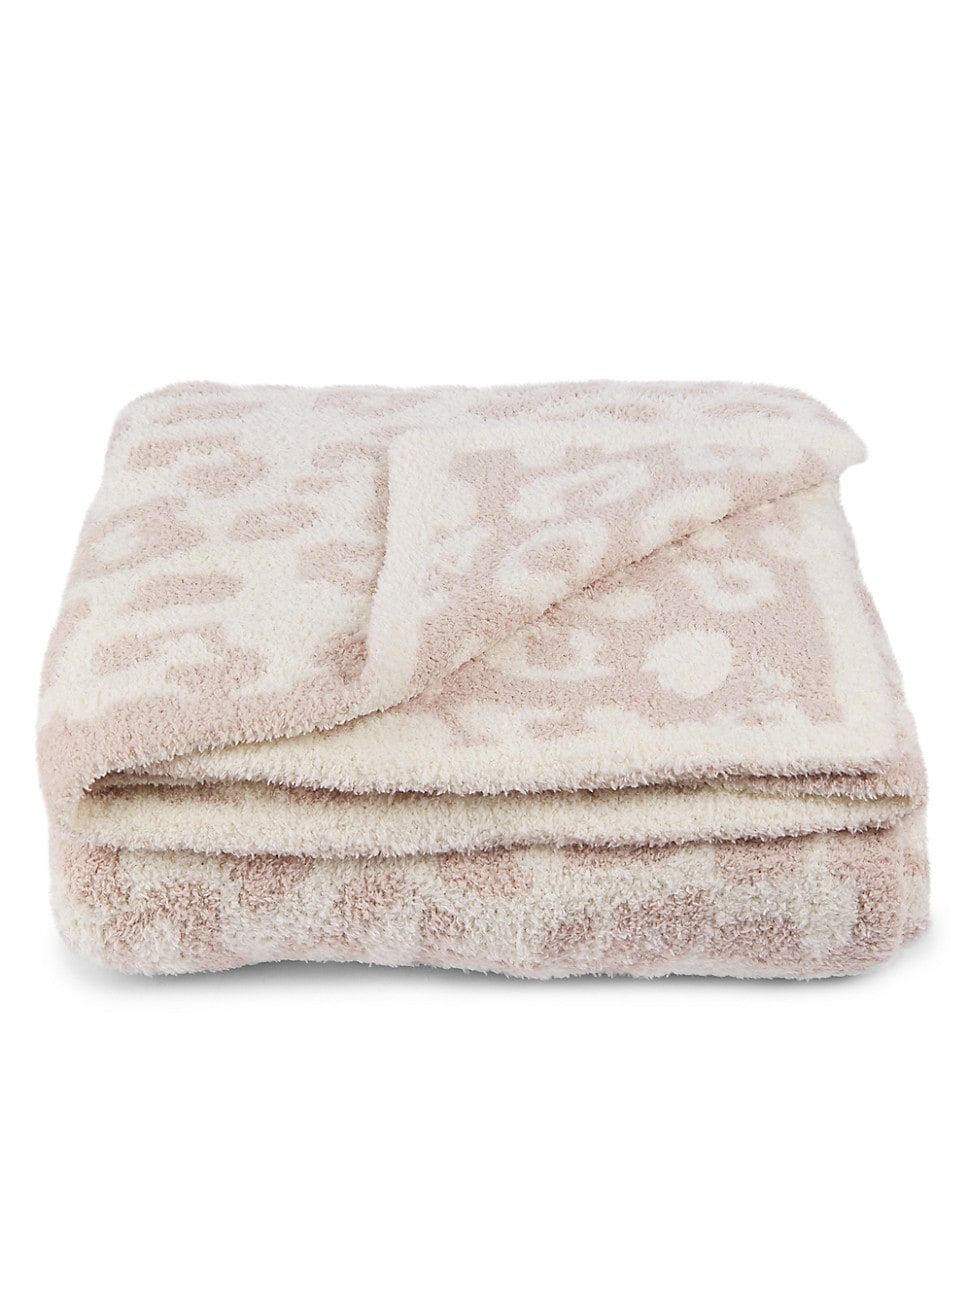 Barefoot Dreams In The Wild Throw - Cream Stone | Saks Fifth Avenue